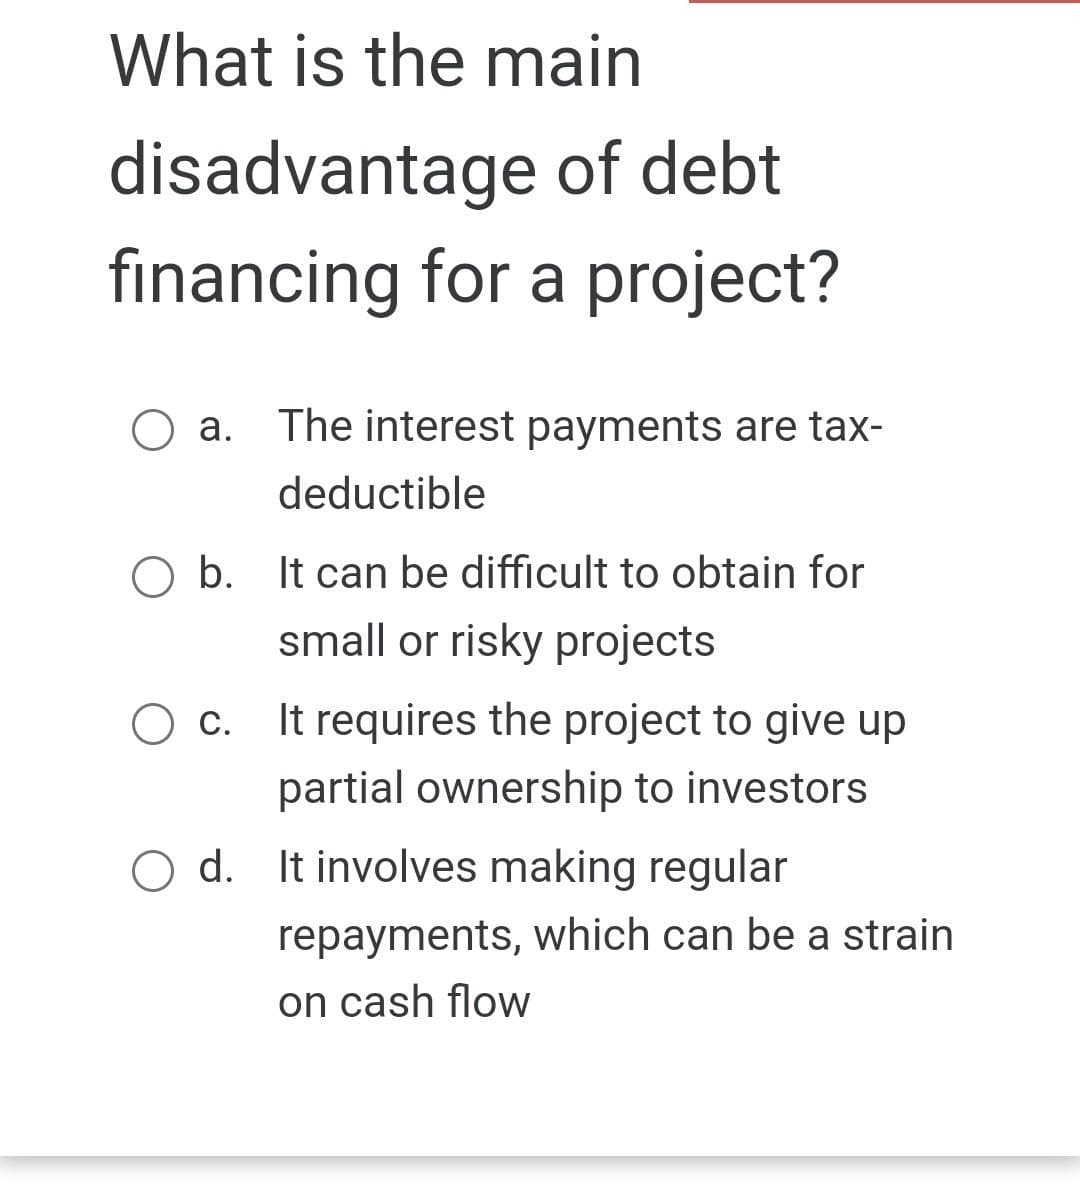 What is the main
disadvantage of debt
financing for a project?
The interest payments are tax-
deductible
b. It can be difficult to obtain for
small or risky projects
O a.
O c.
It requires the project to give up
partial ownership to investors
O d. It involves making regular
repayments, which can be a strain
on cash flow